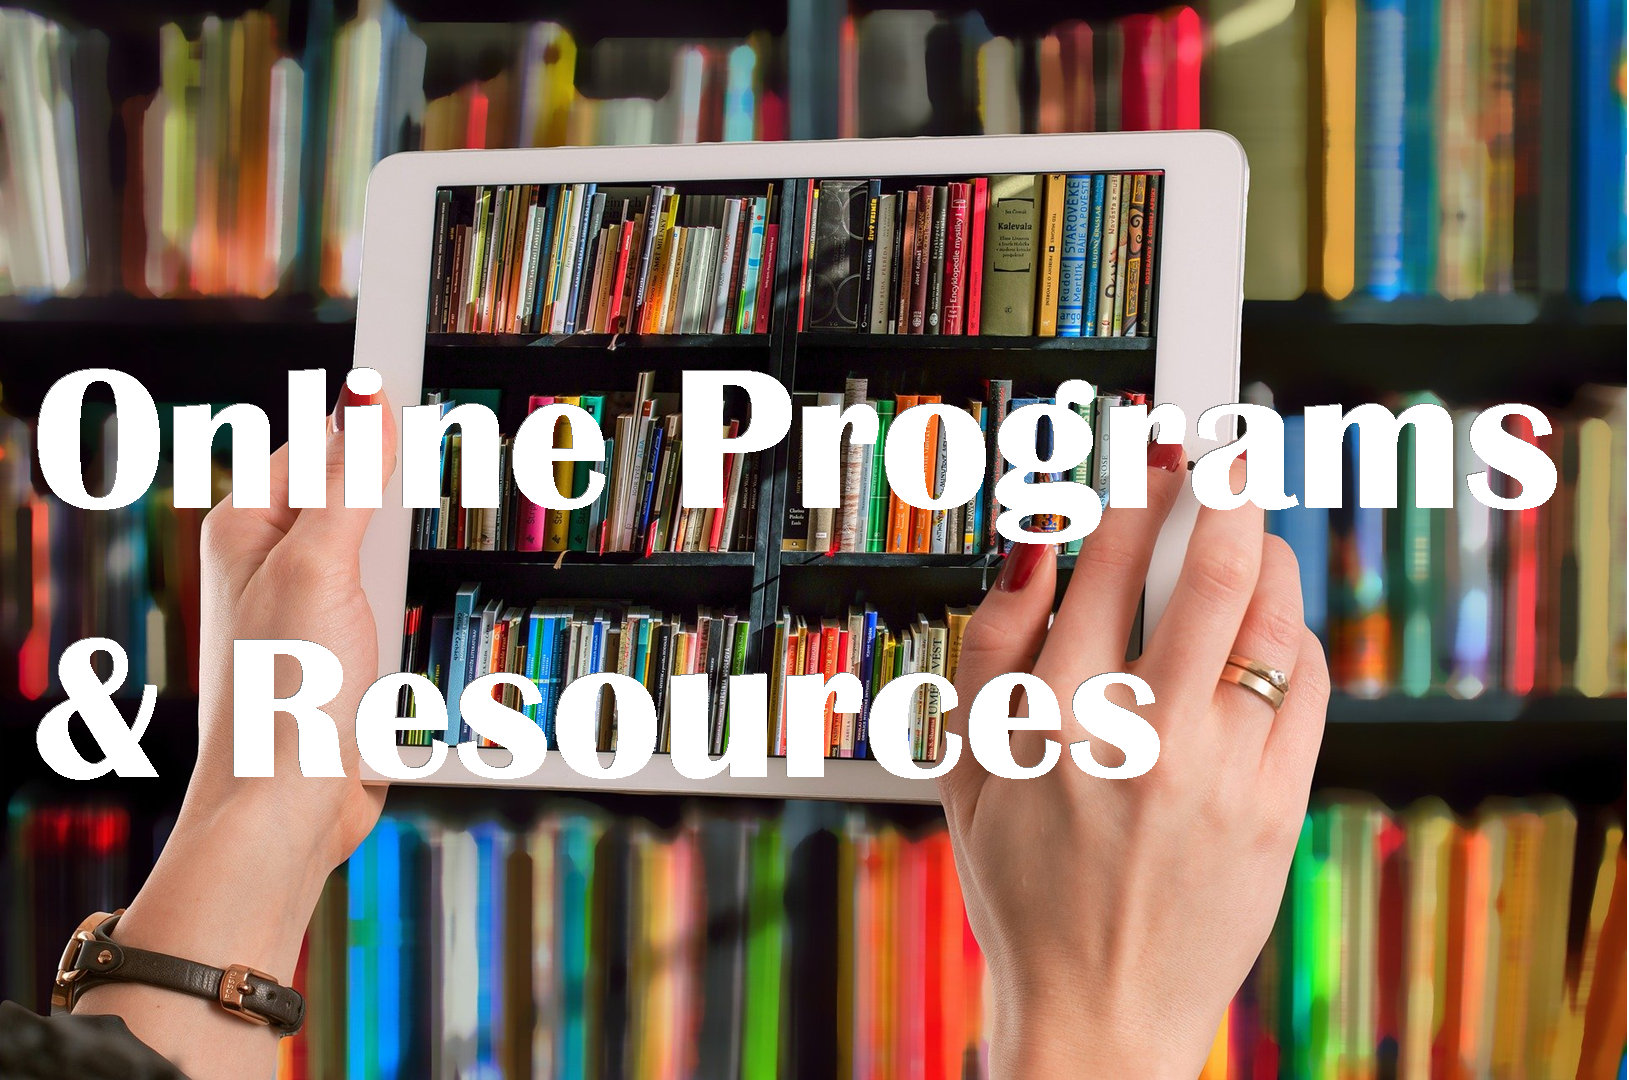 Online Programs and Resources